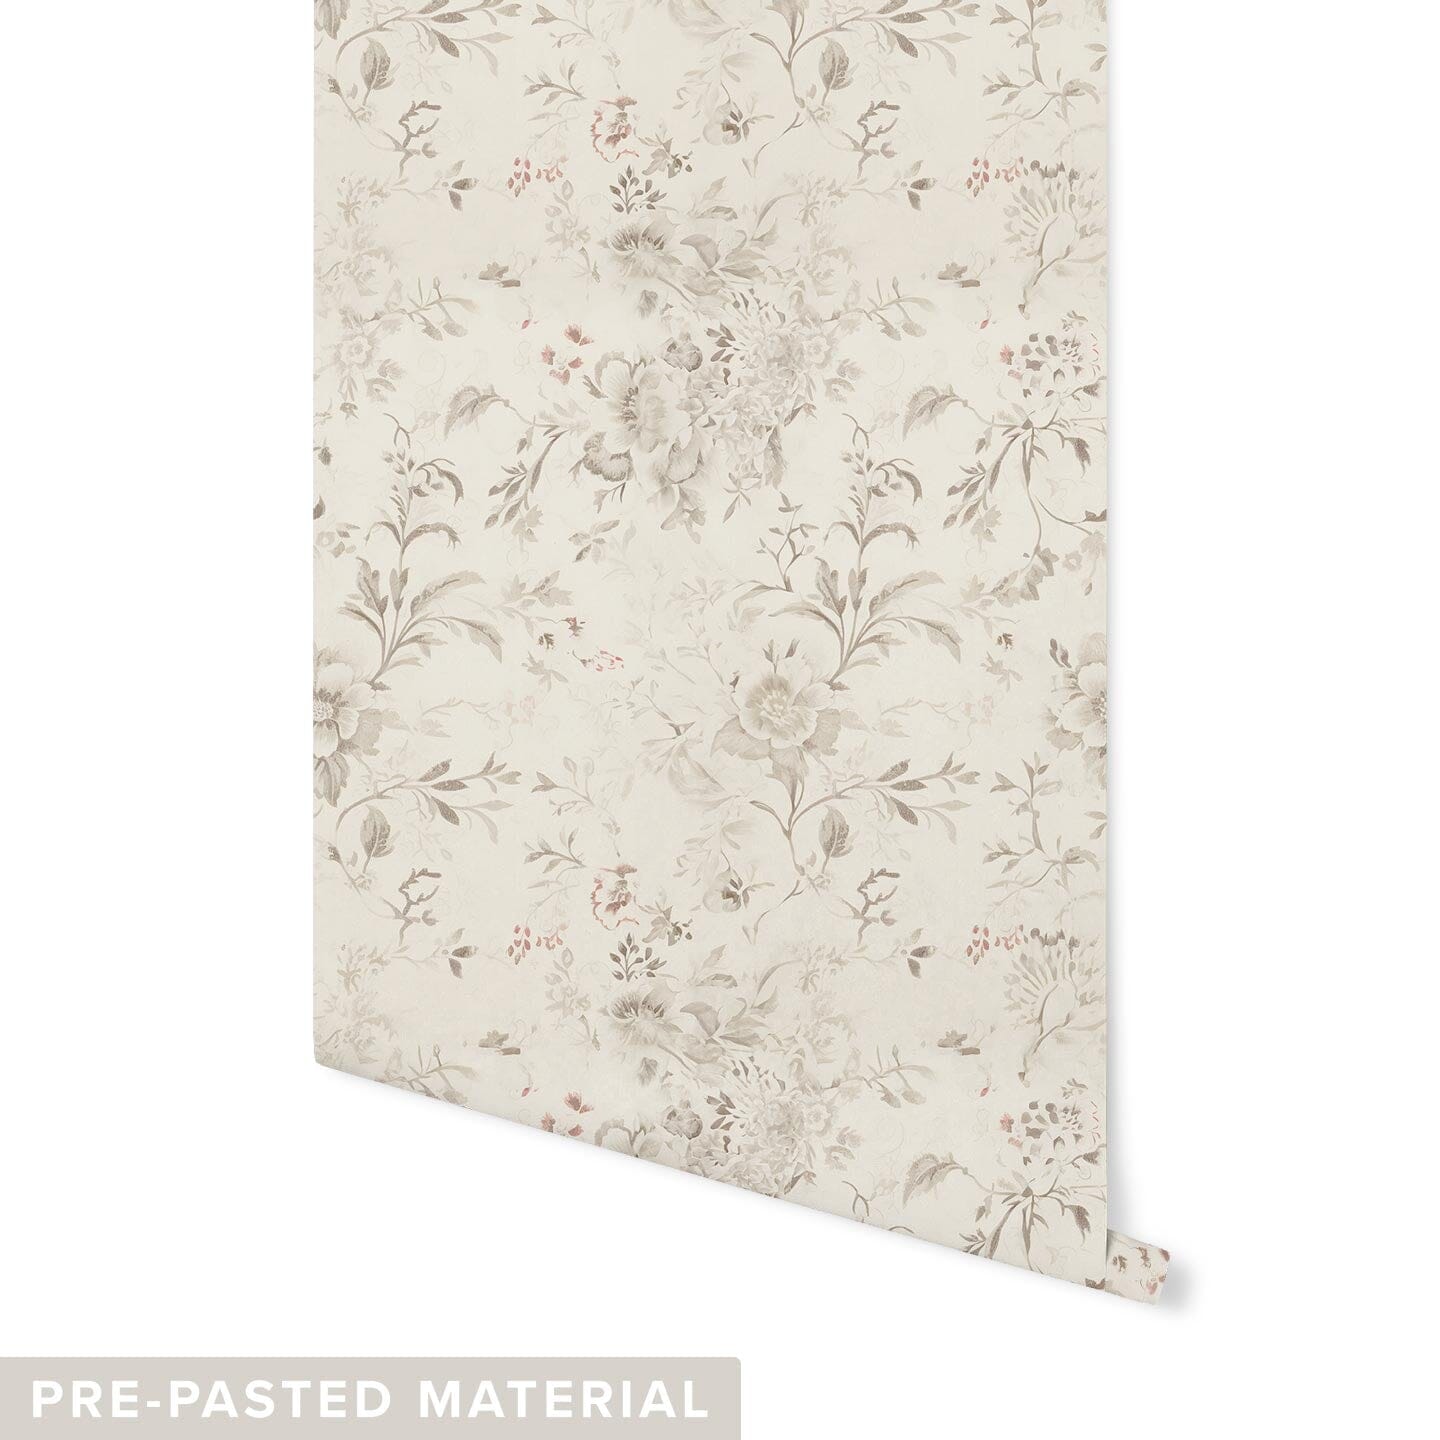 Antique Floral Wallpaper Wallpaper Urbanwalls Pre-pasted Beige DOUBLE ROLL : 46" X 4 FEET